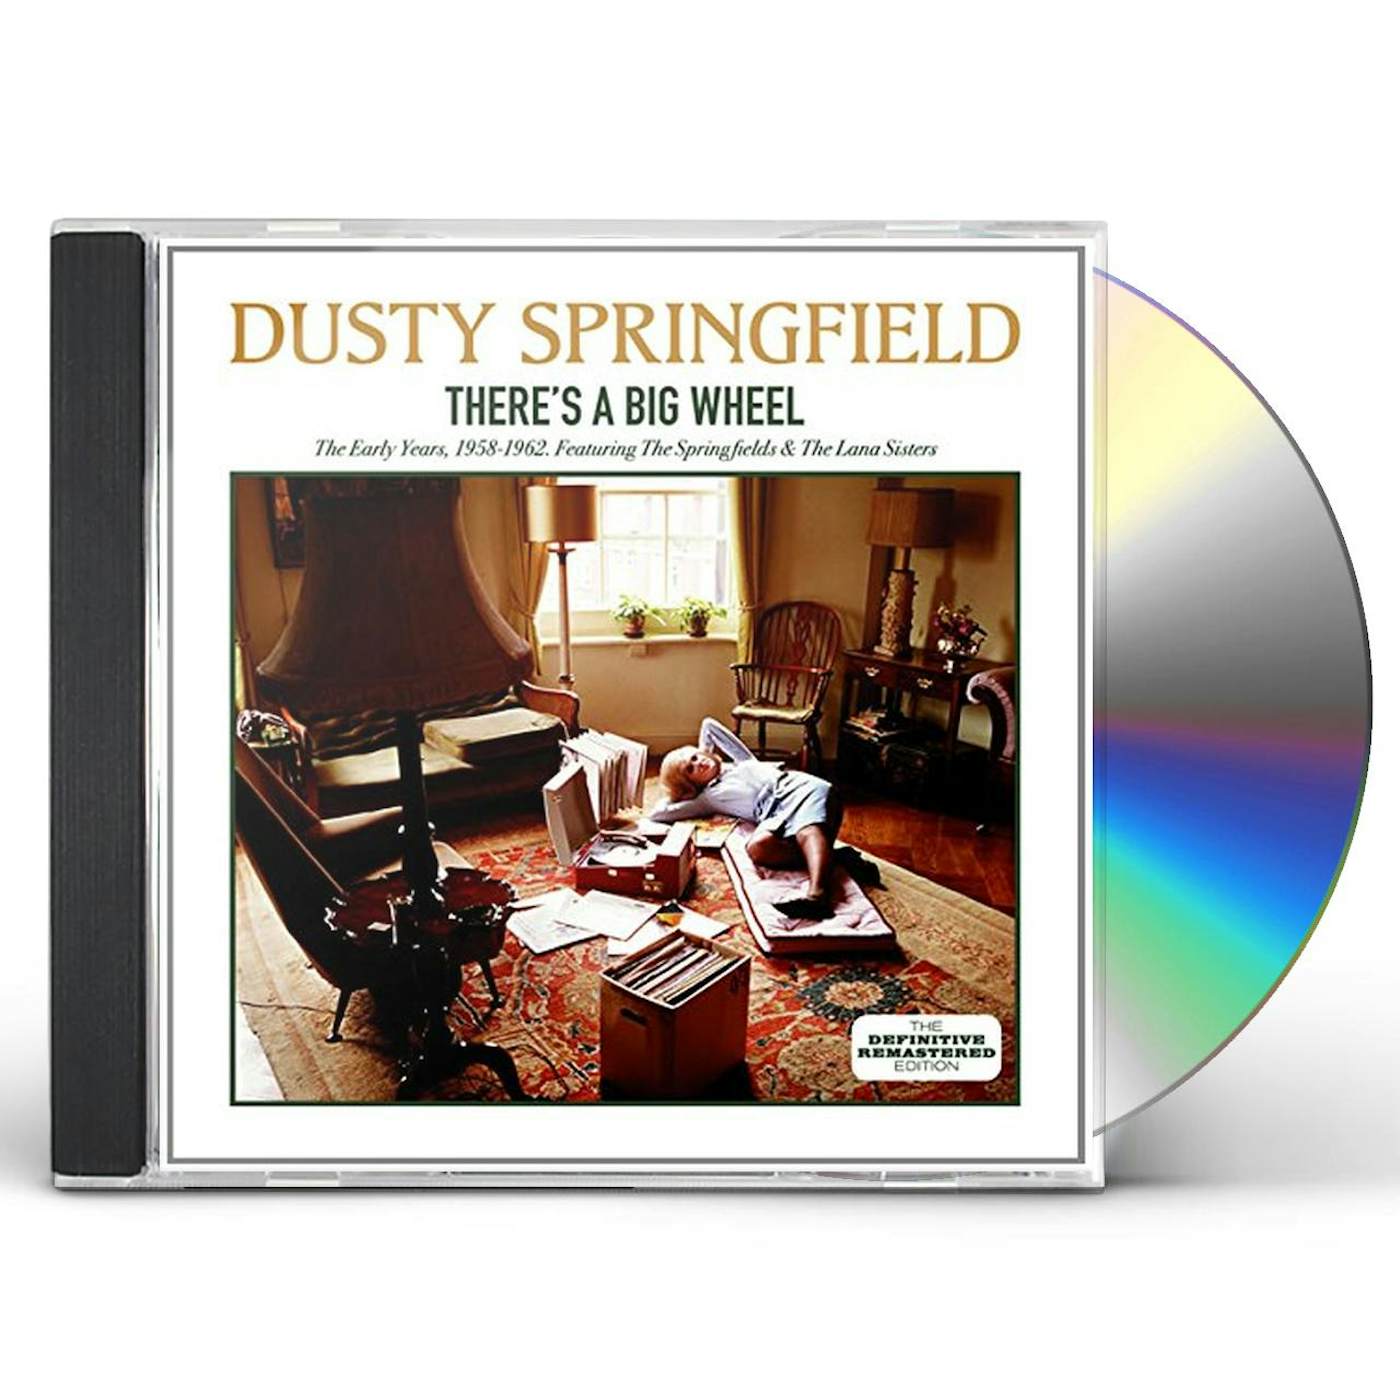 Dusty Springfield THERE'S A BIG WHEEL CD